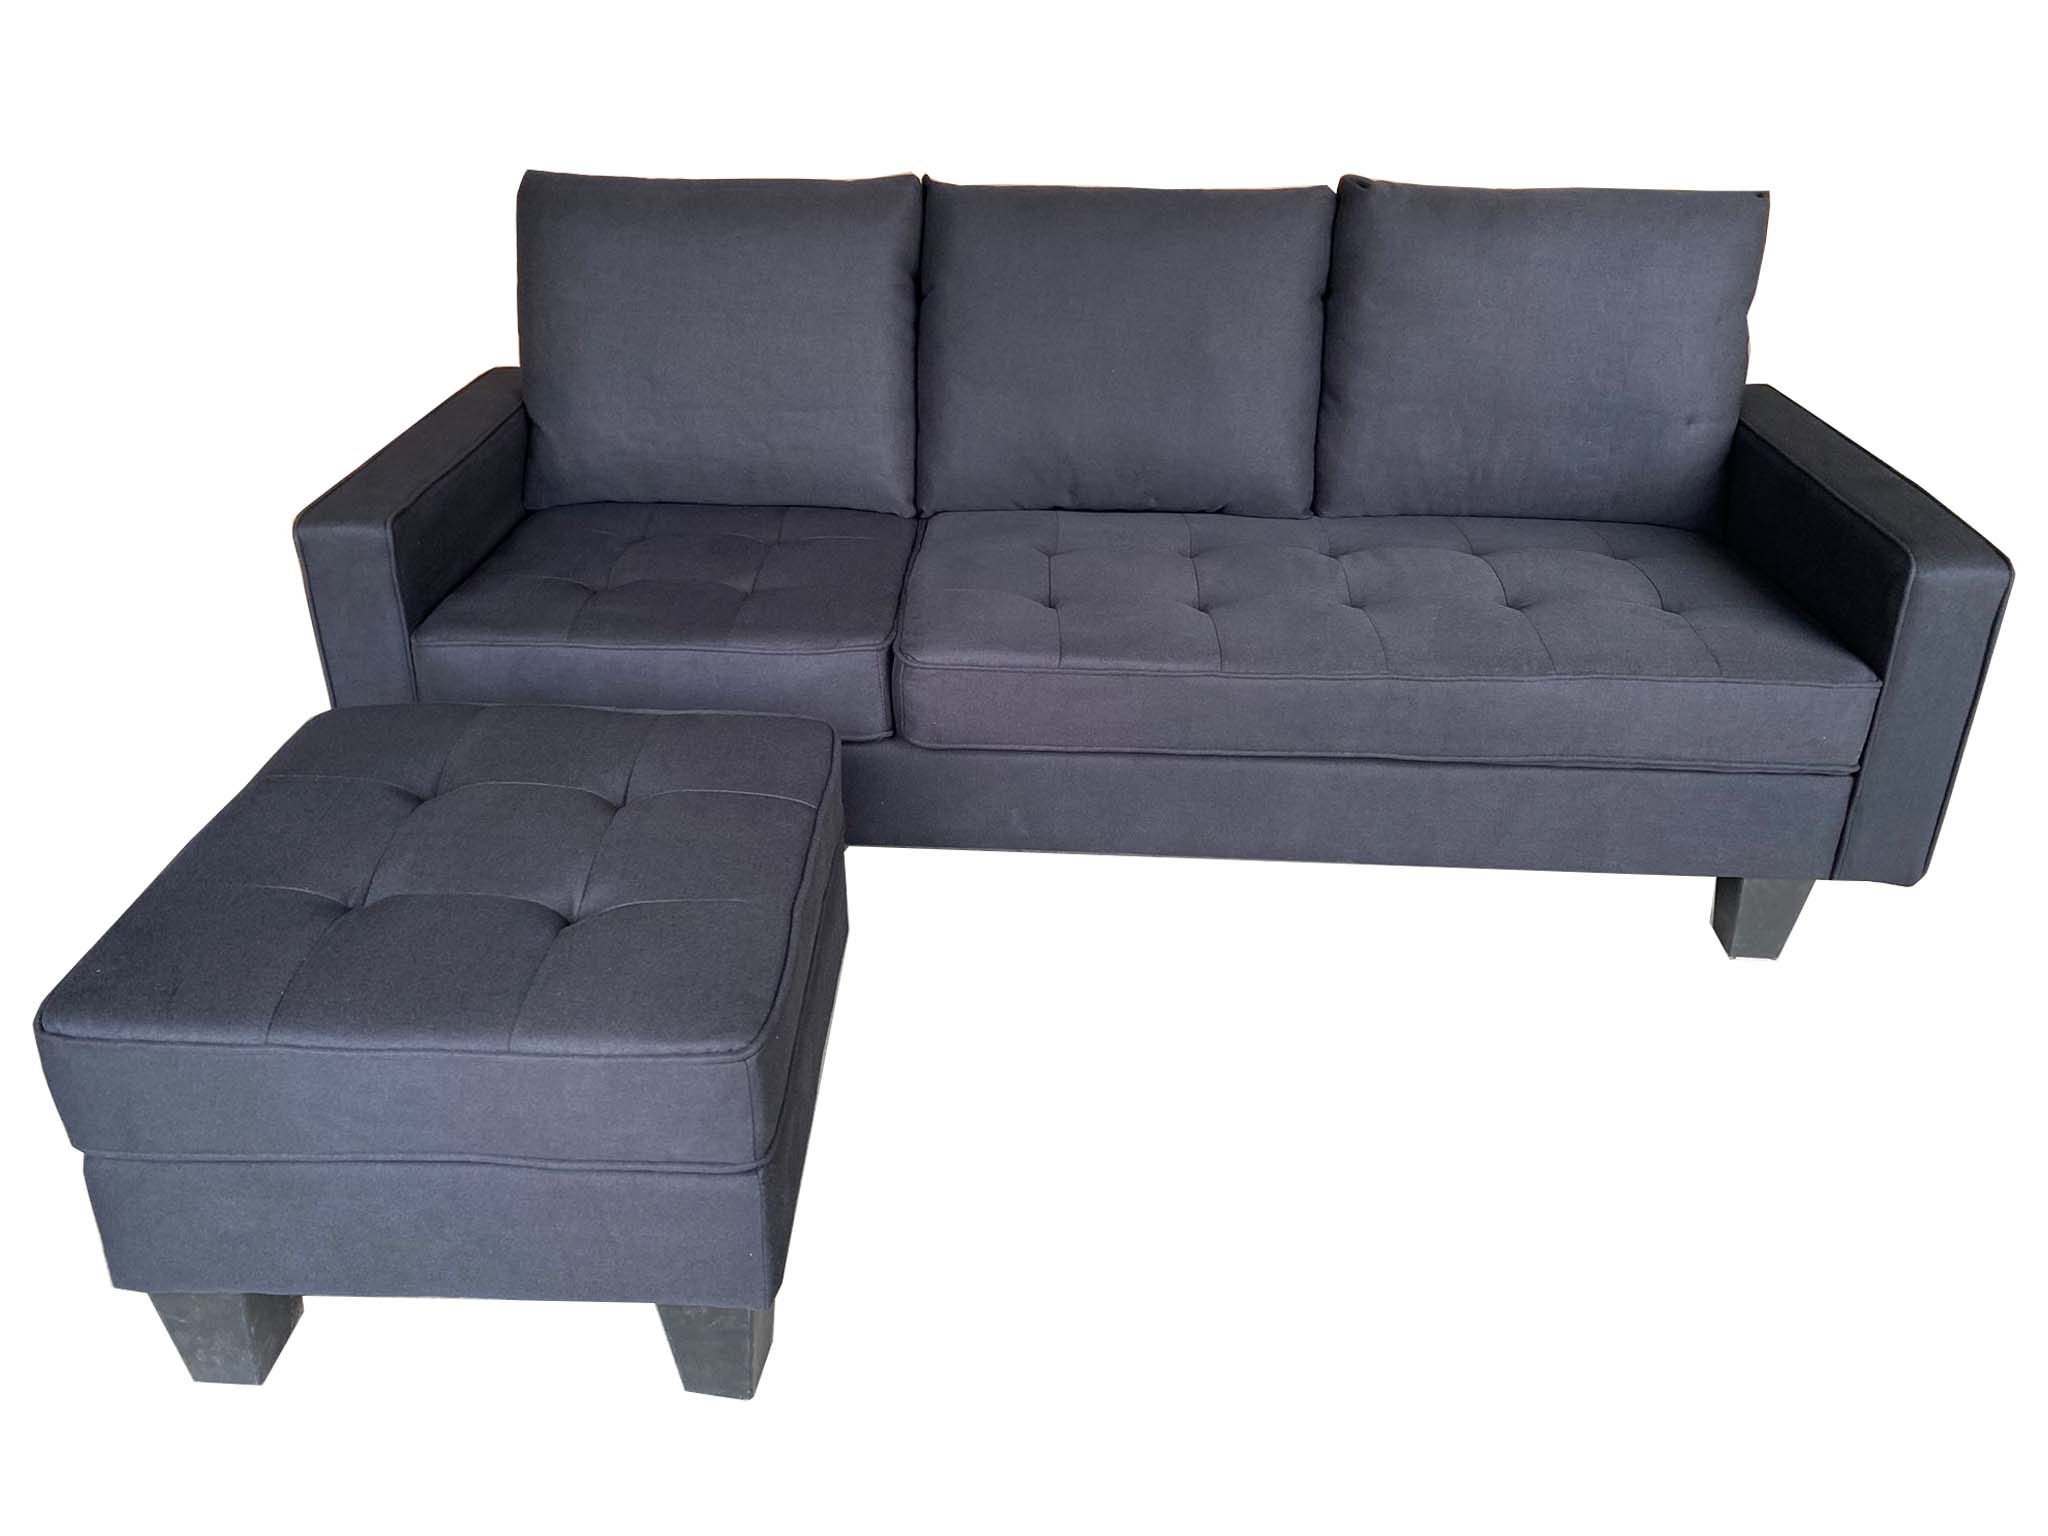 Black Fabric Sectional Sofa with Floating Ottoman 2209